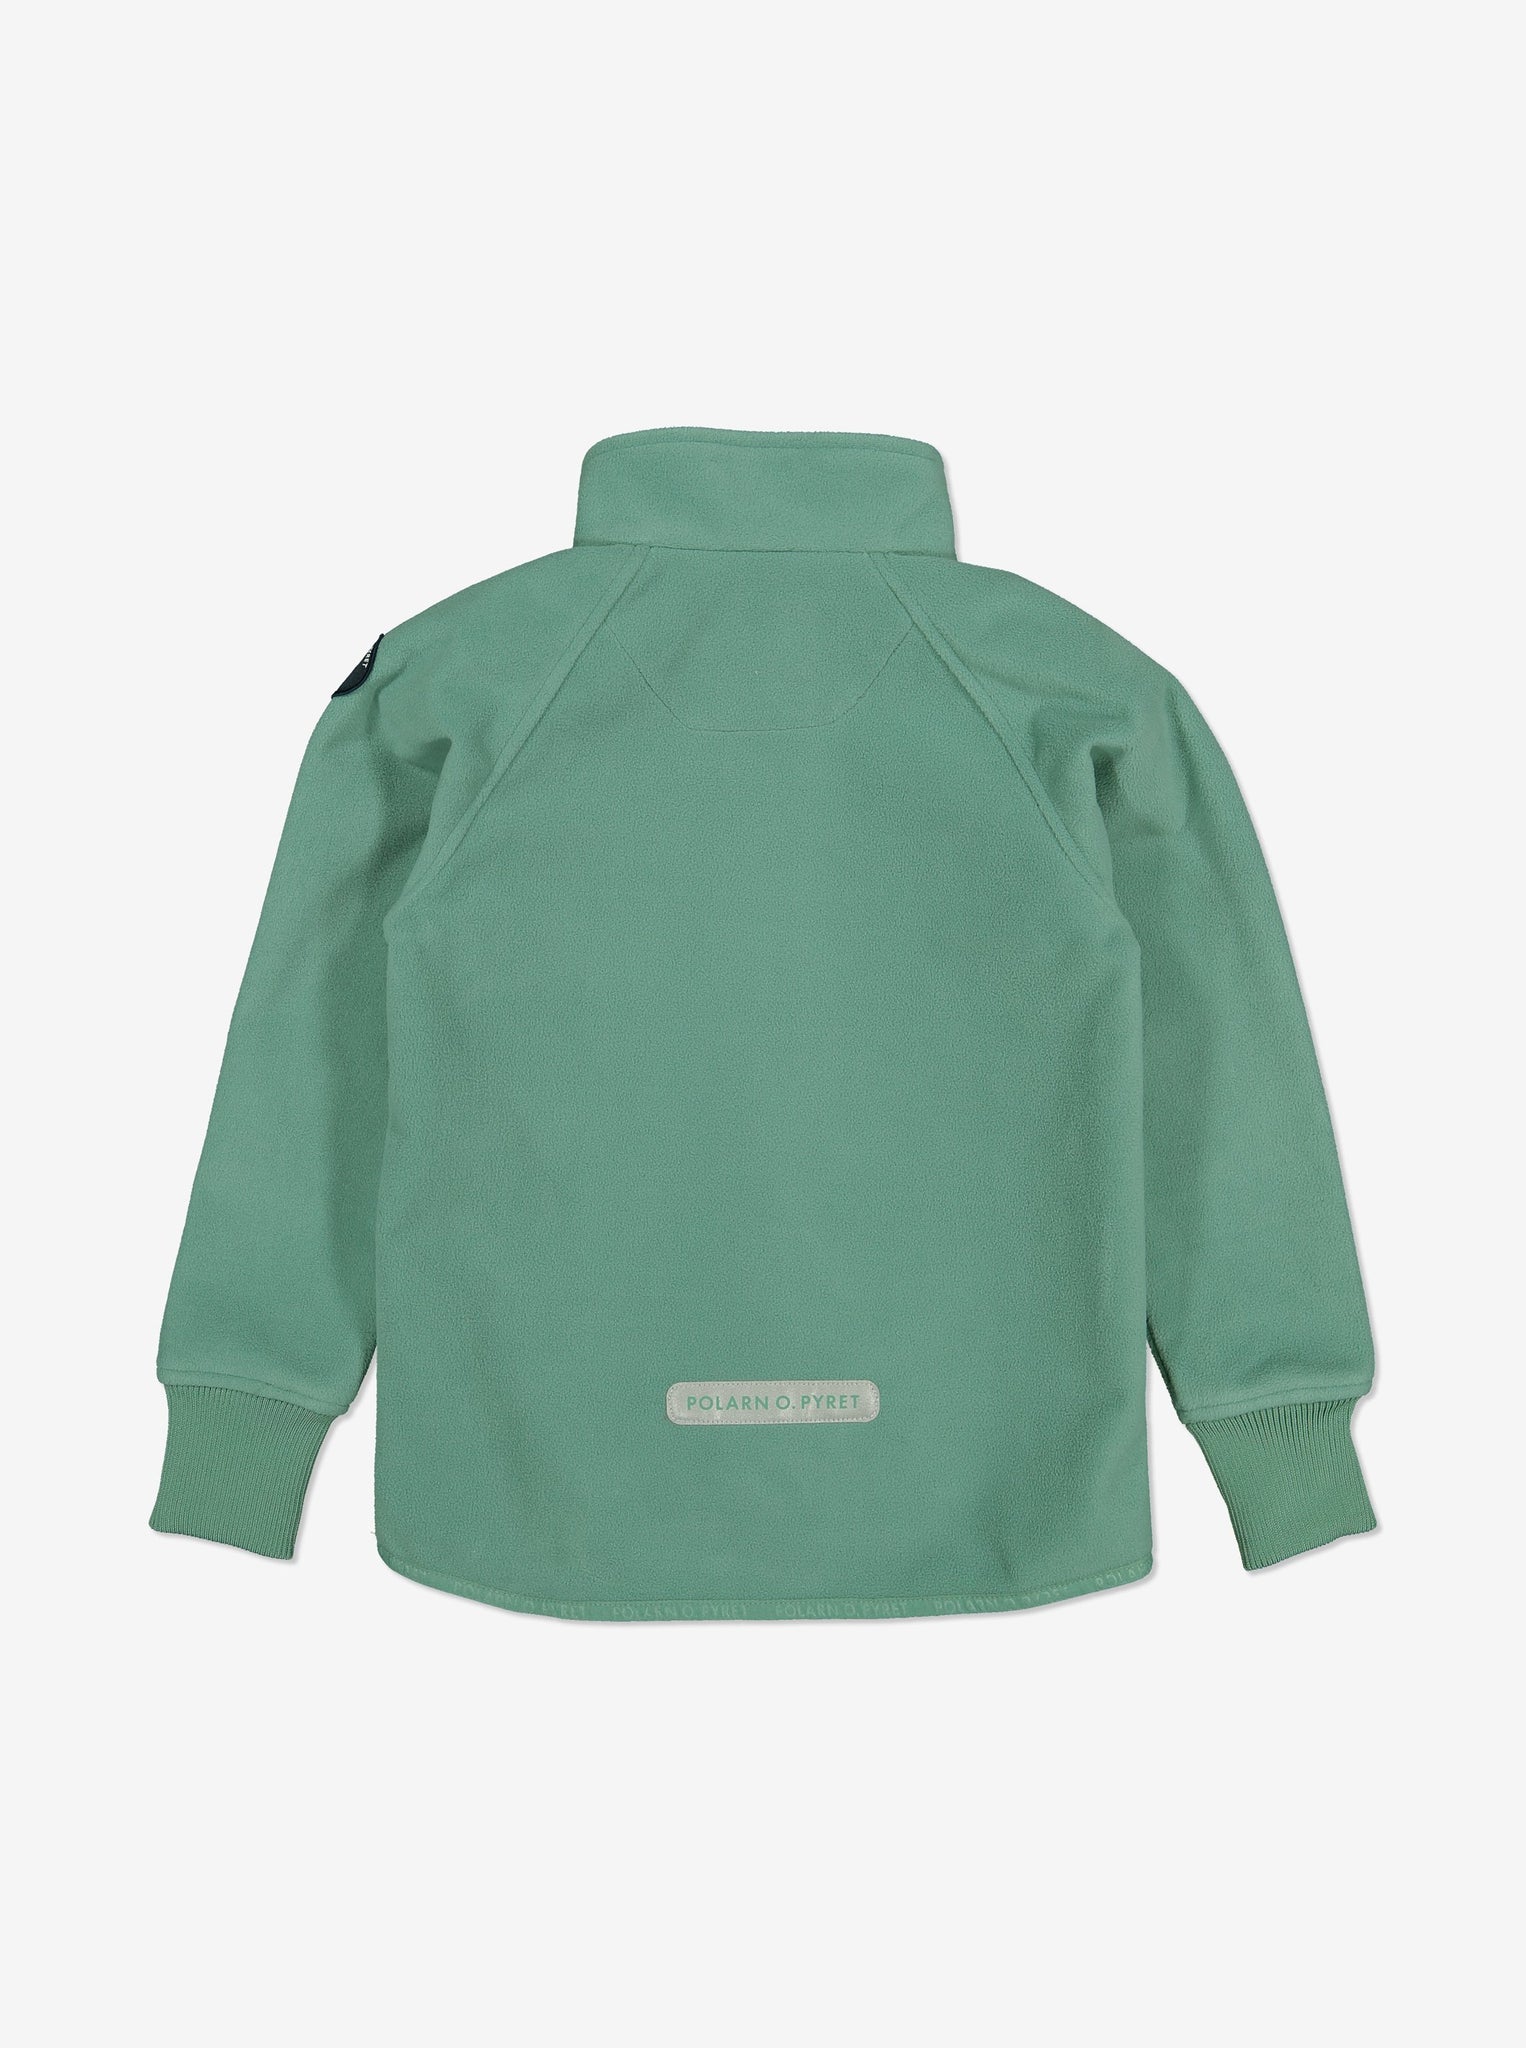 Back view of a kids waterproof fleece jacket in green, with fit cuffs and logo patch at the back, made of breathable fabric.